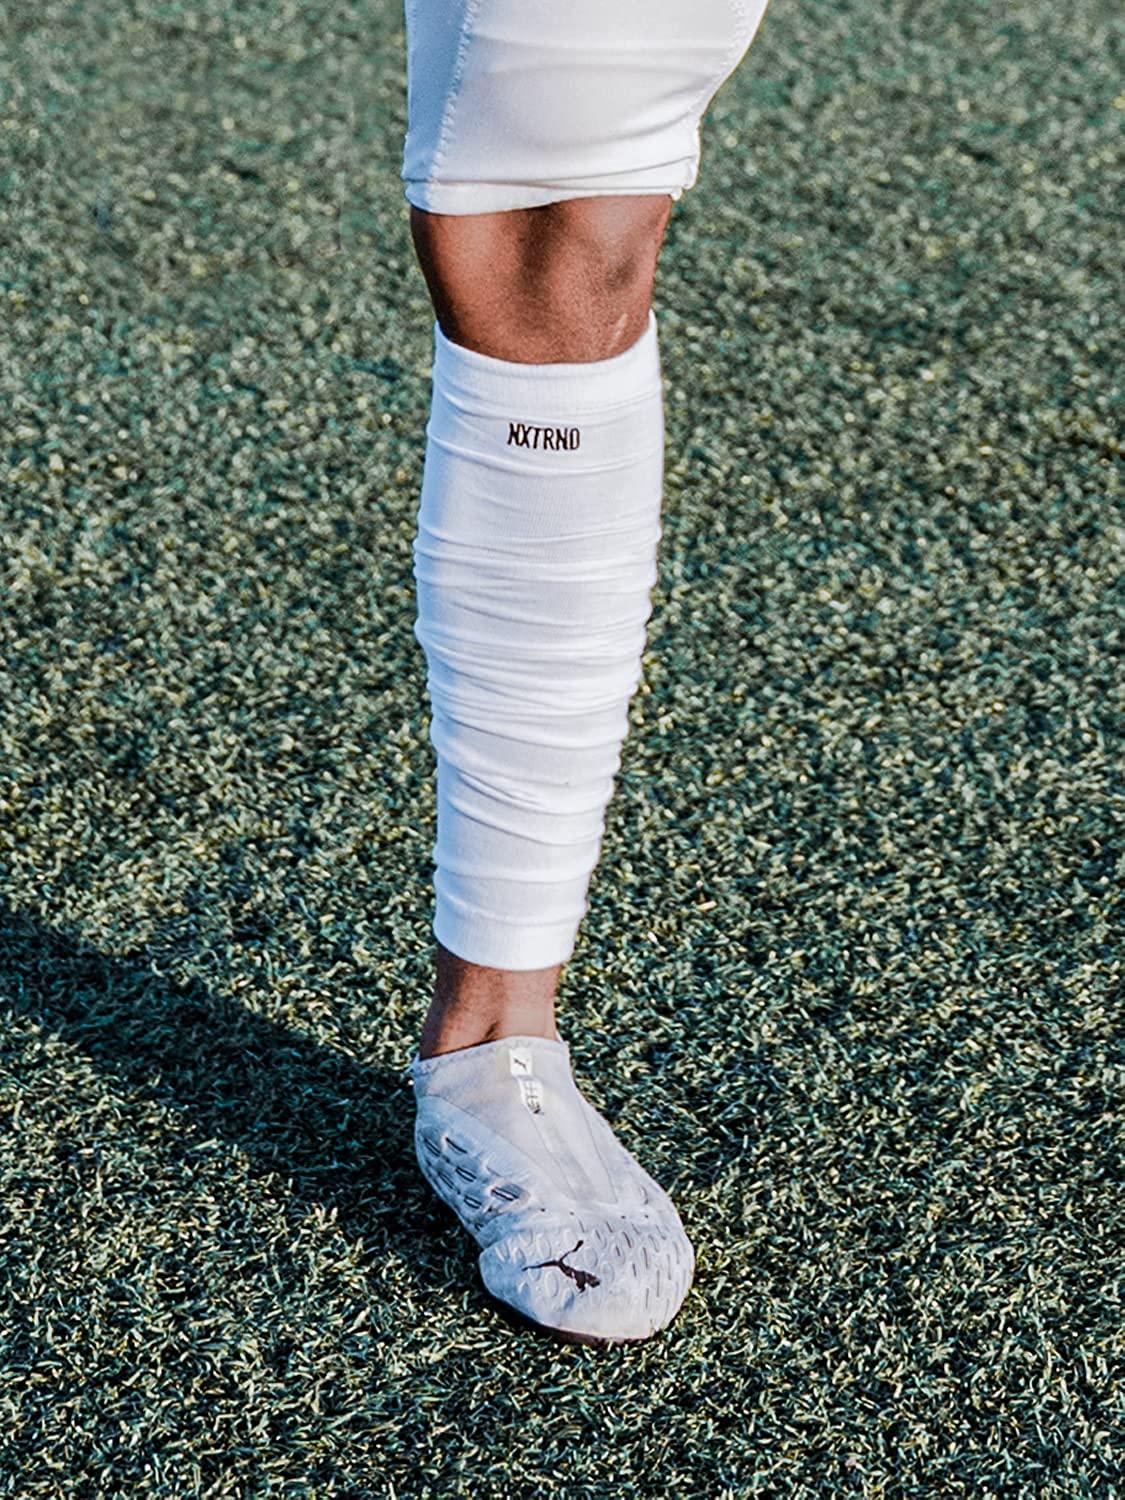 Nxtrnd Football Leg Sleeves, Calf Sleeves for Men & Boys, Sold as a Pair  White One Size